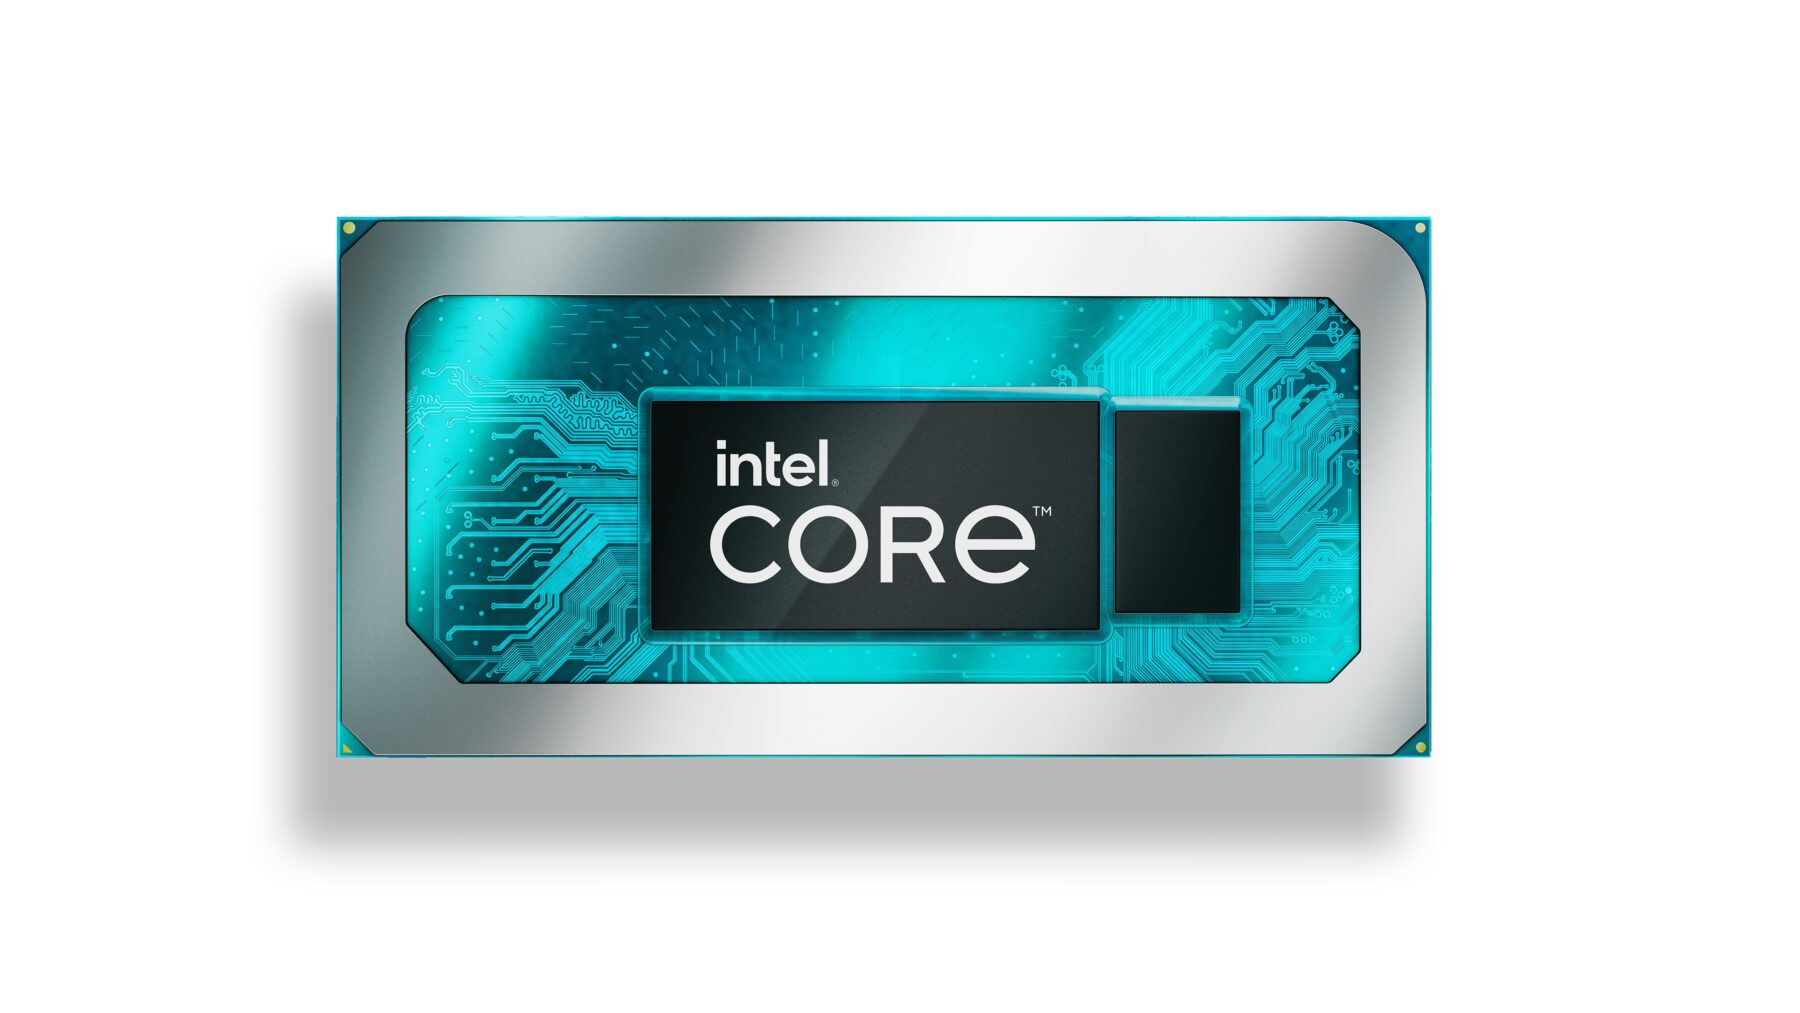 Intel Extends Performance Leadership With World'S Fastest Mobile Processor